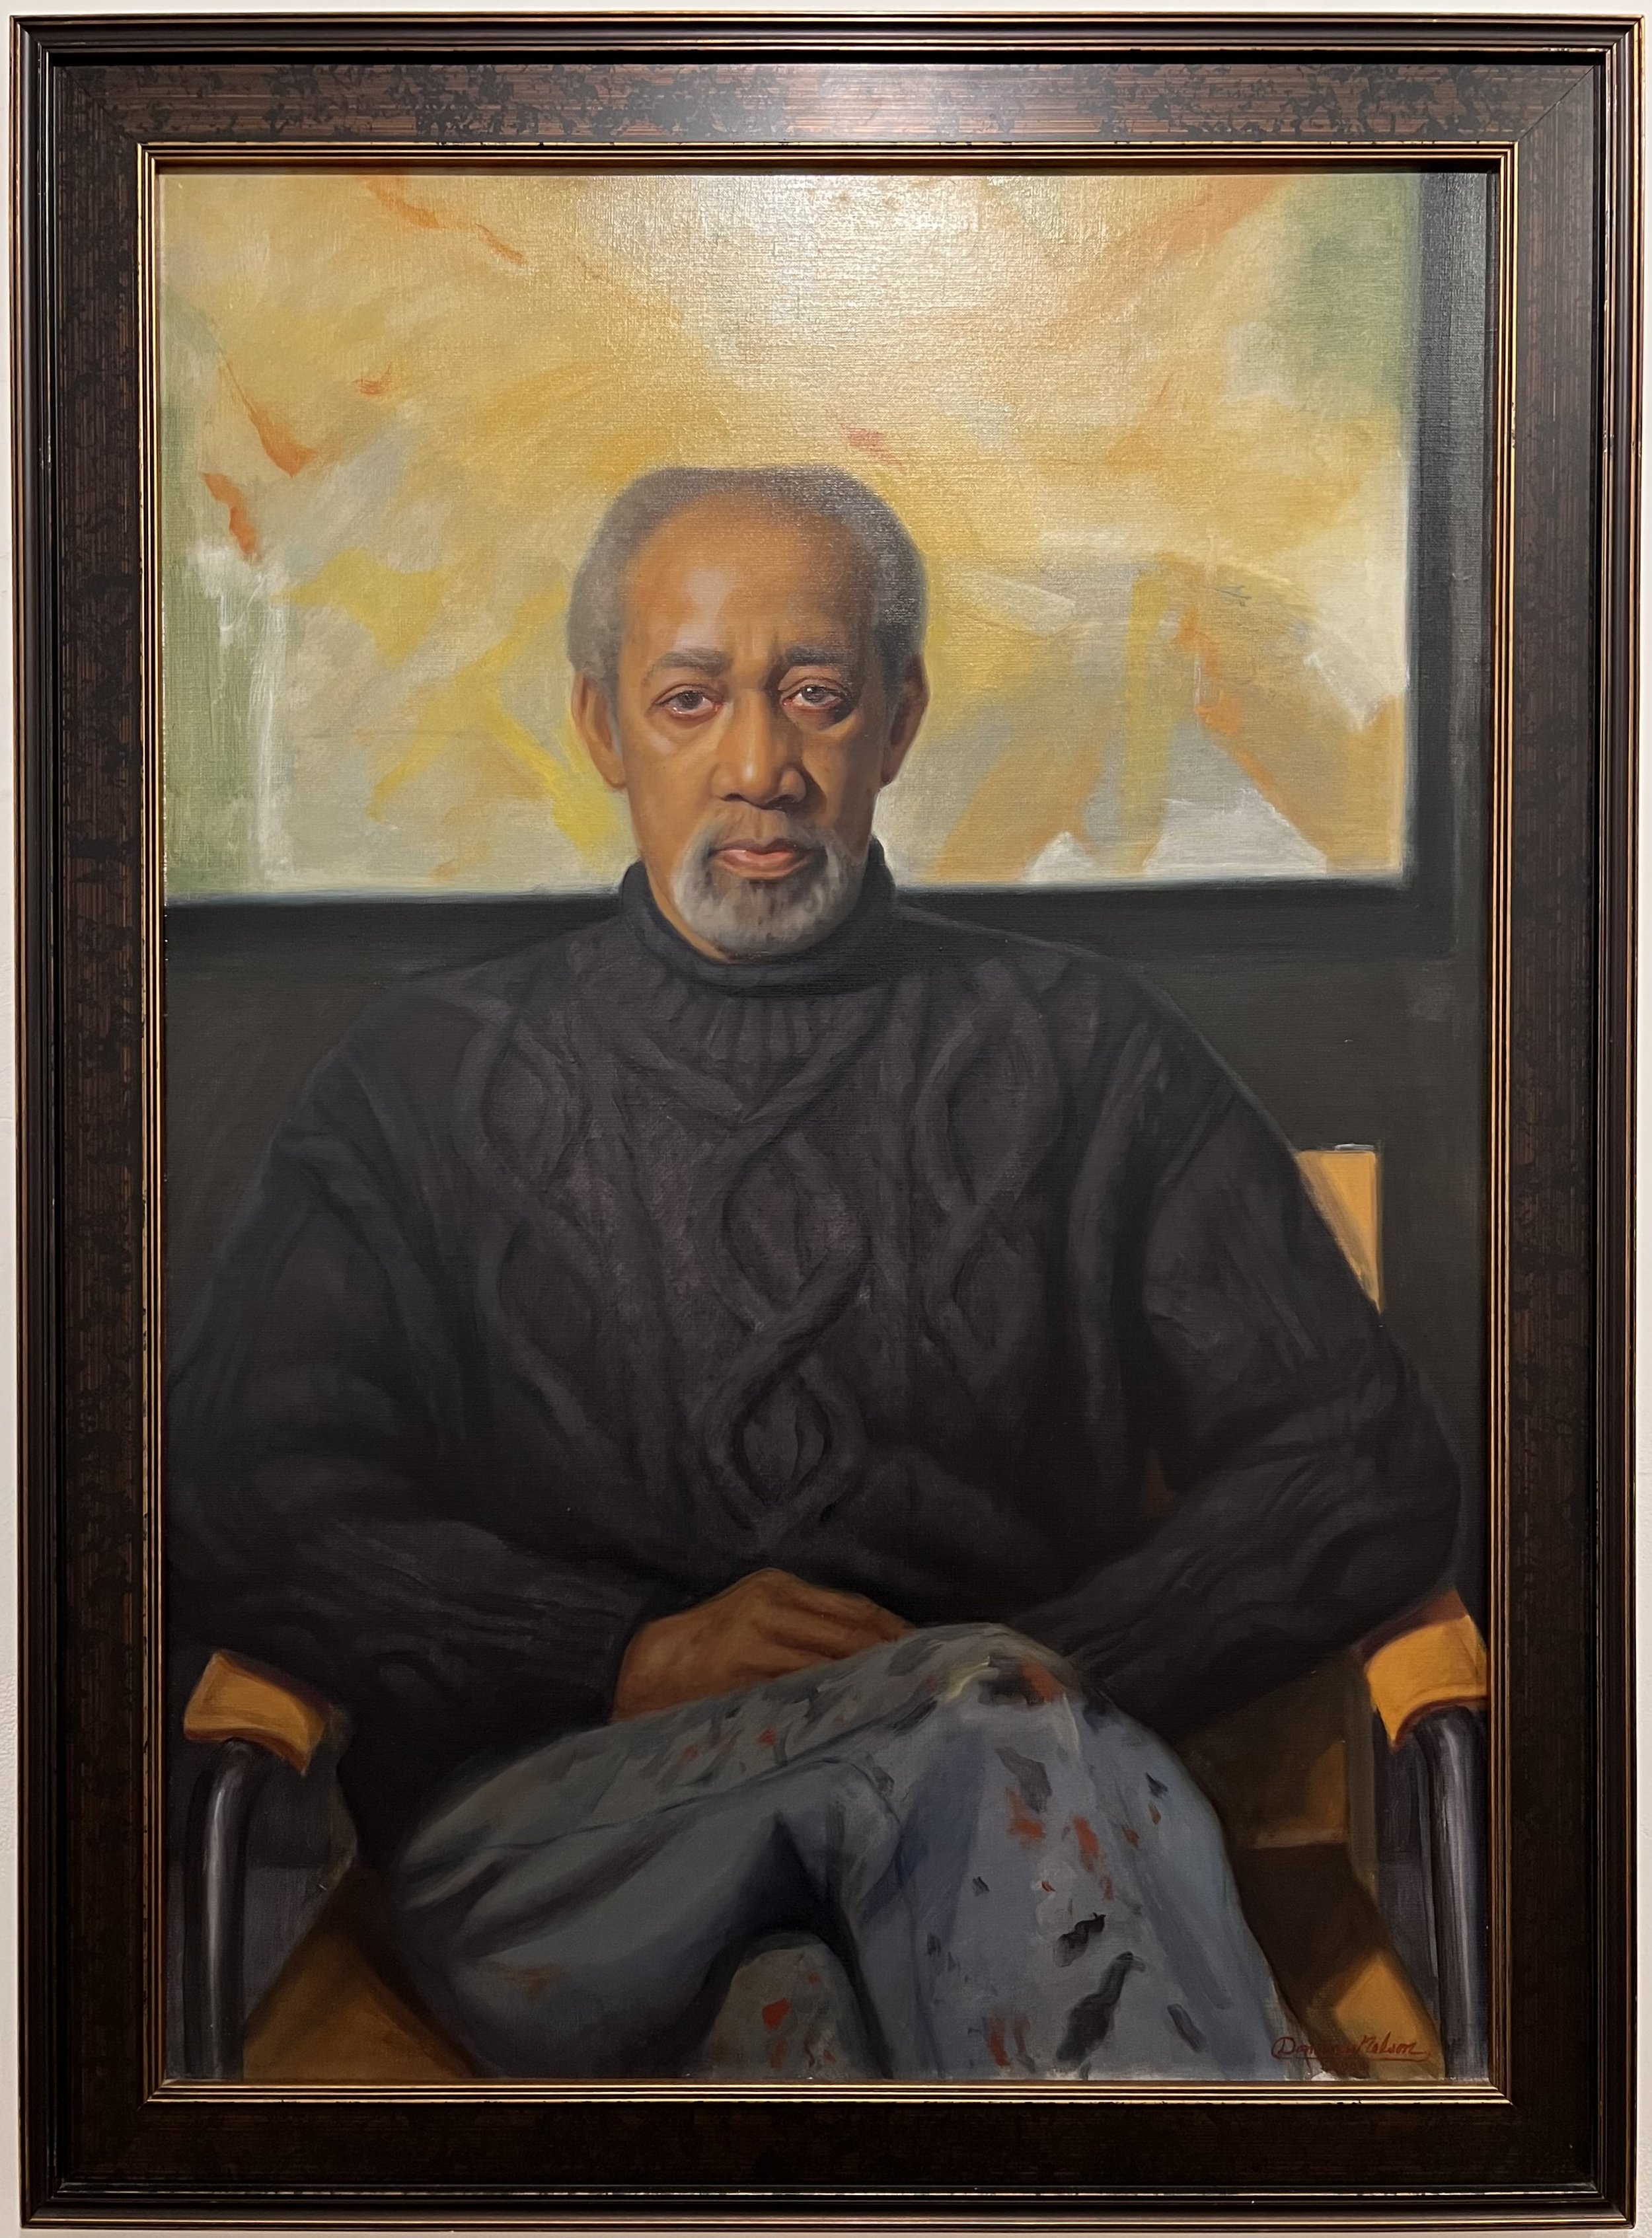  Frank Wimberly, 2008 Oil on canvas  40 x 30 inches 